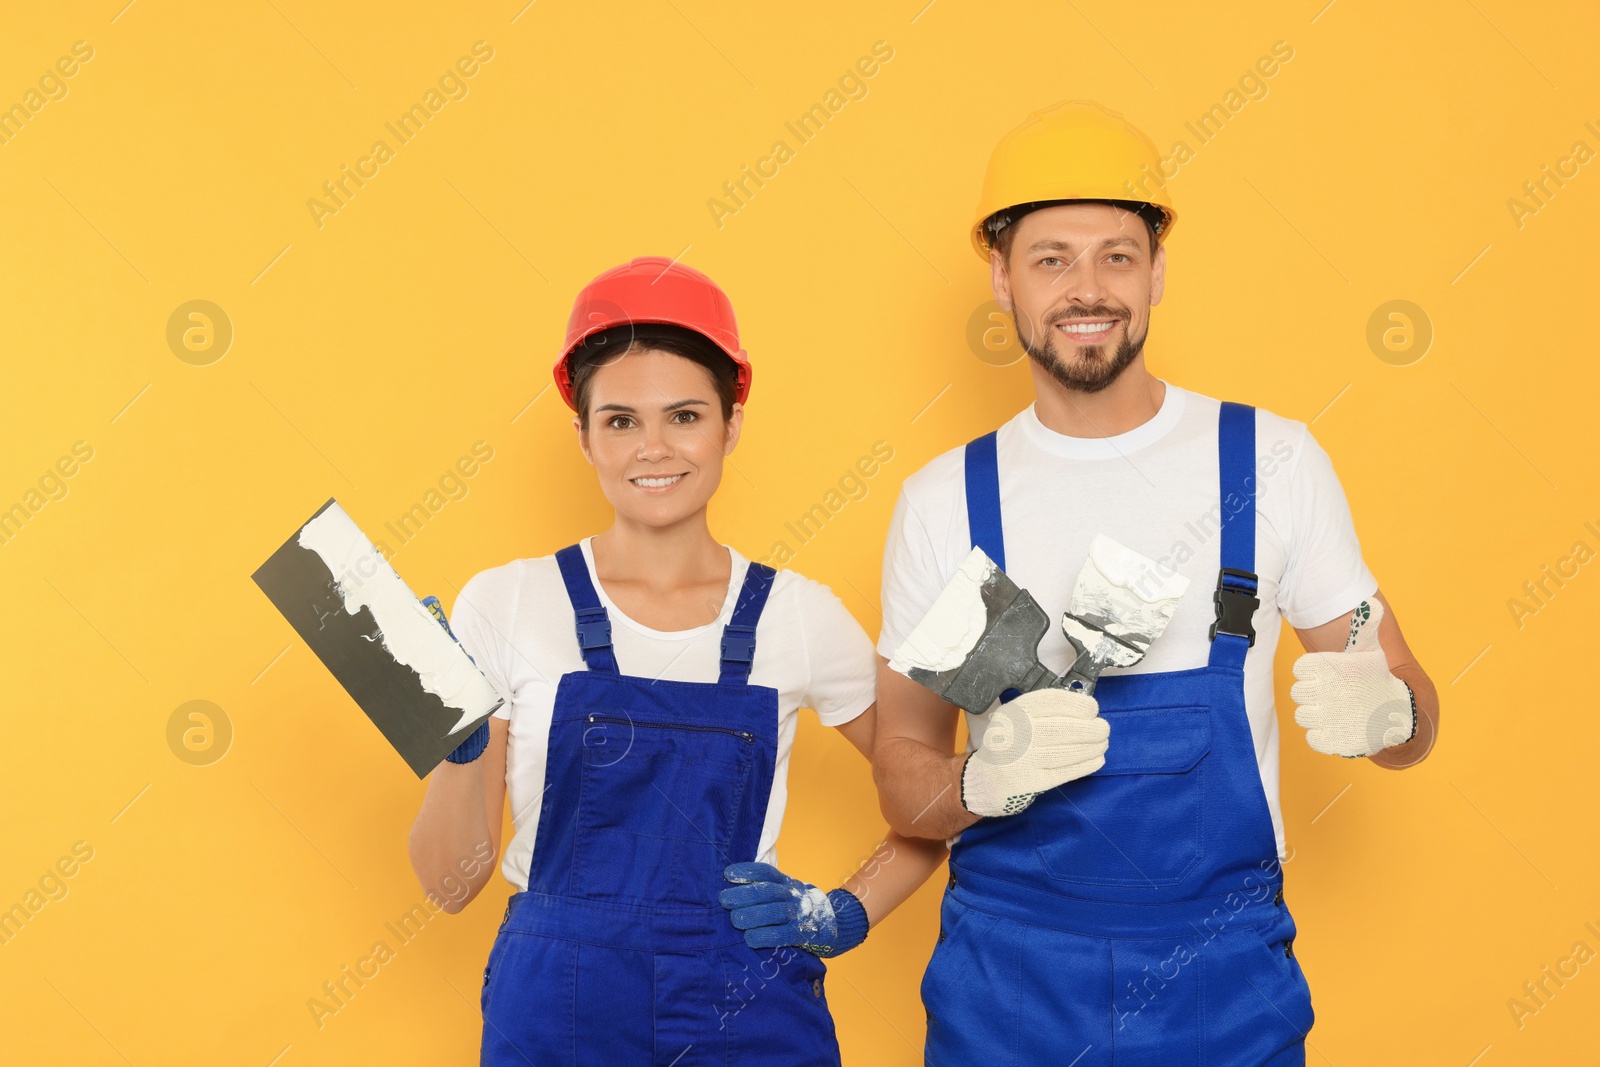 Photo of Professional workers with putty knives in hard hats on orange background